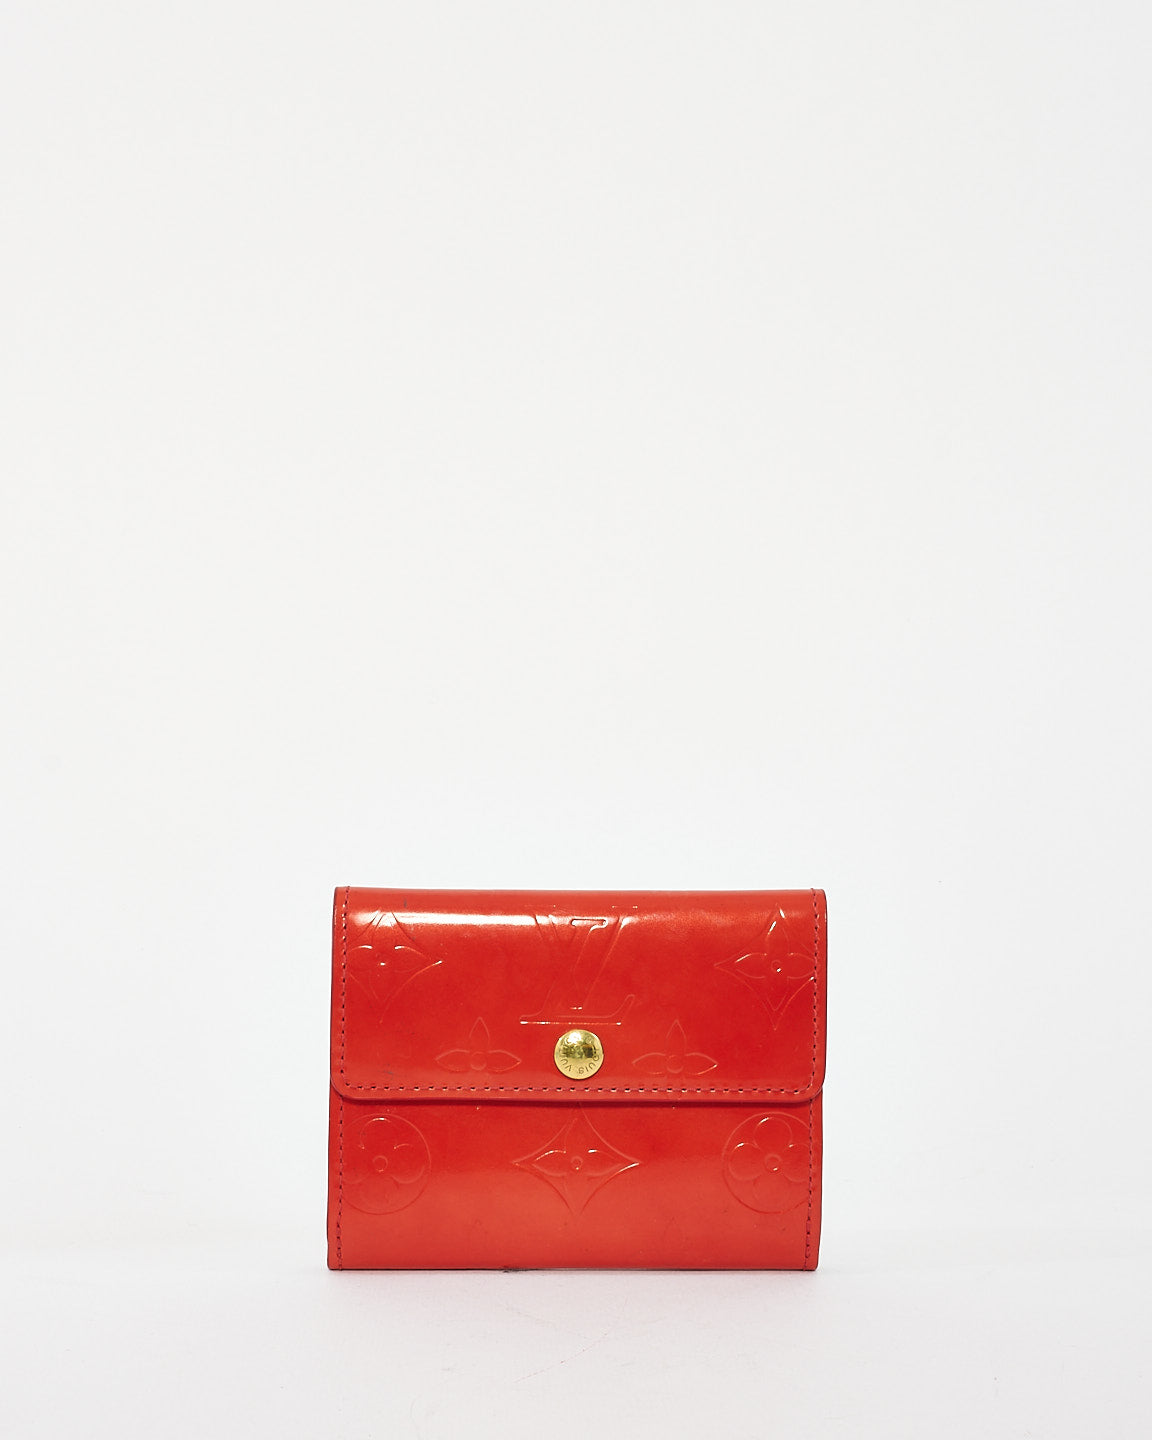 Keep My Heart Monogram Vernis Leather - Women - Small Leather Goods